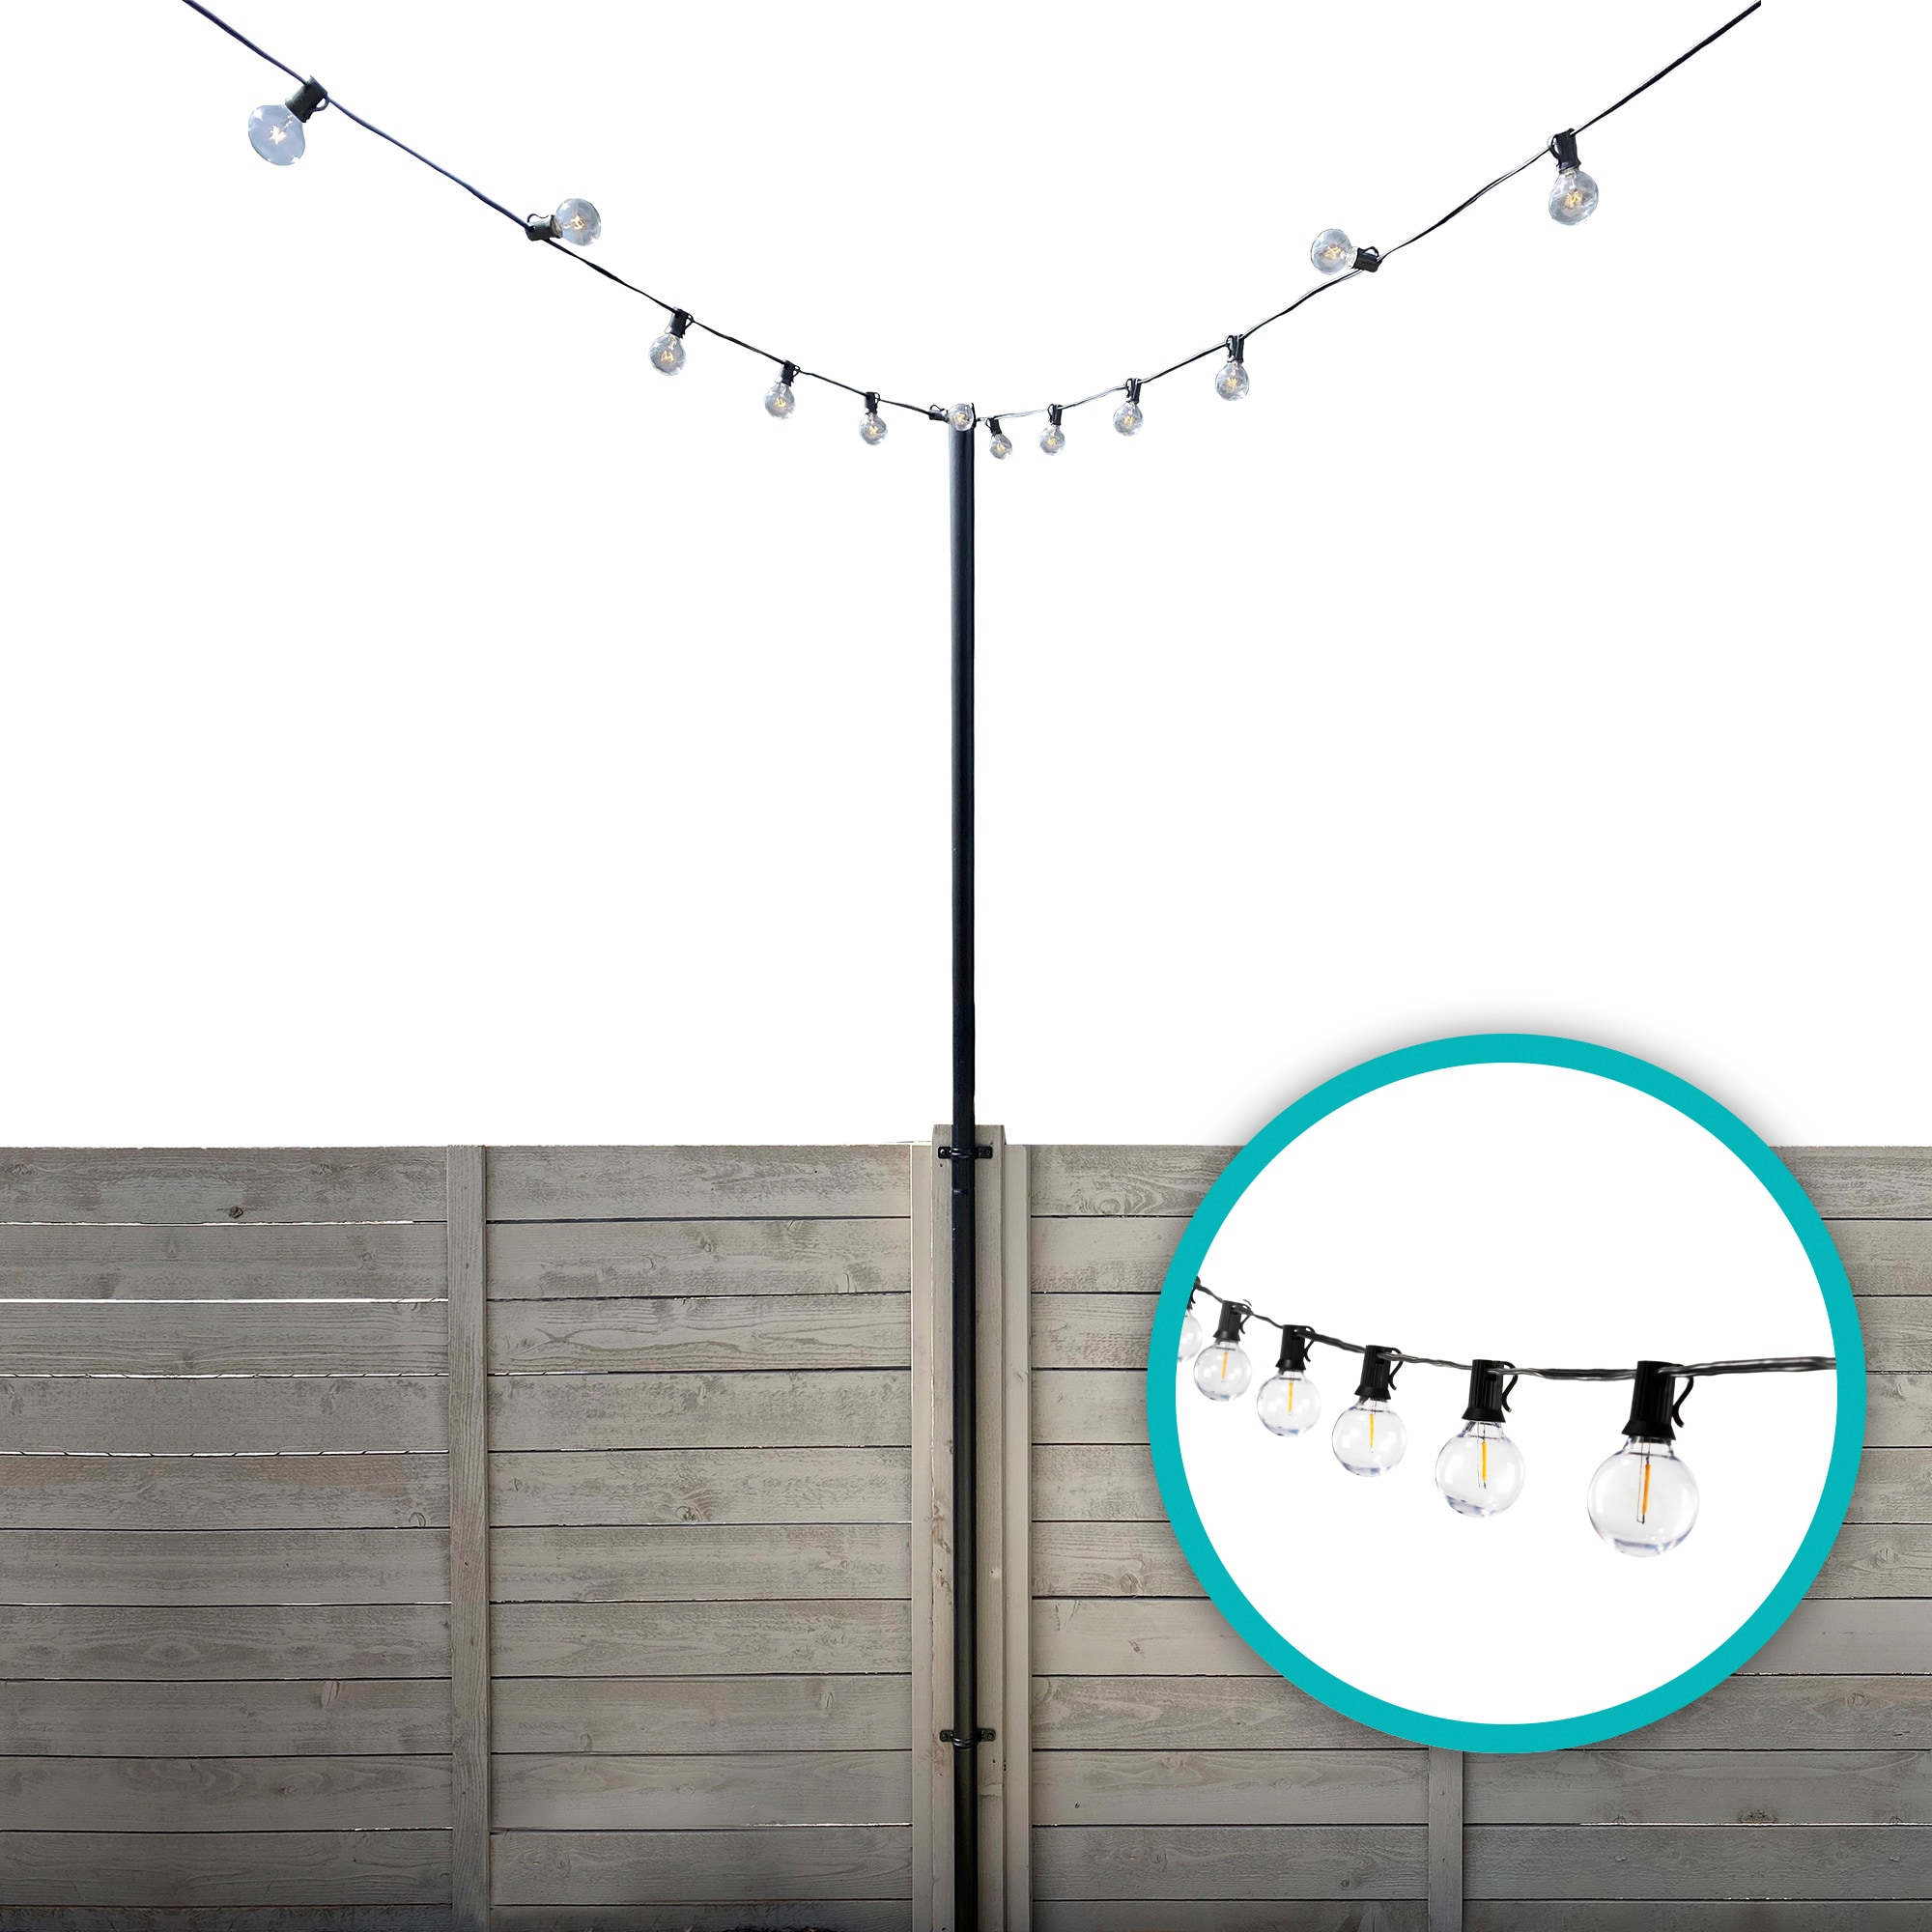 Allsop 9.5' Heavy-Duty String Light Pole Stand with Mounting